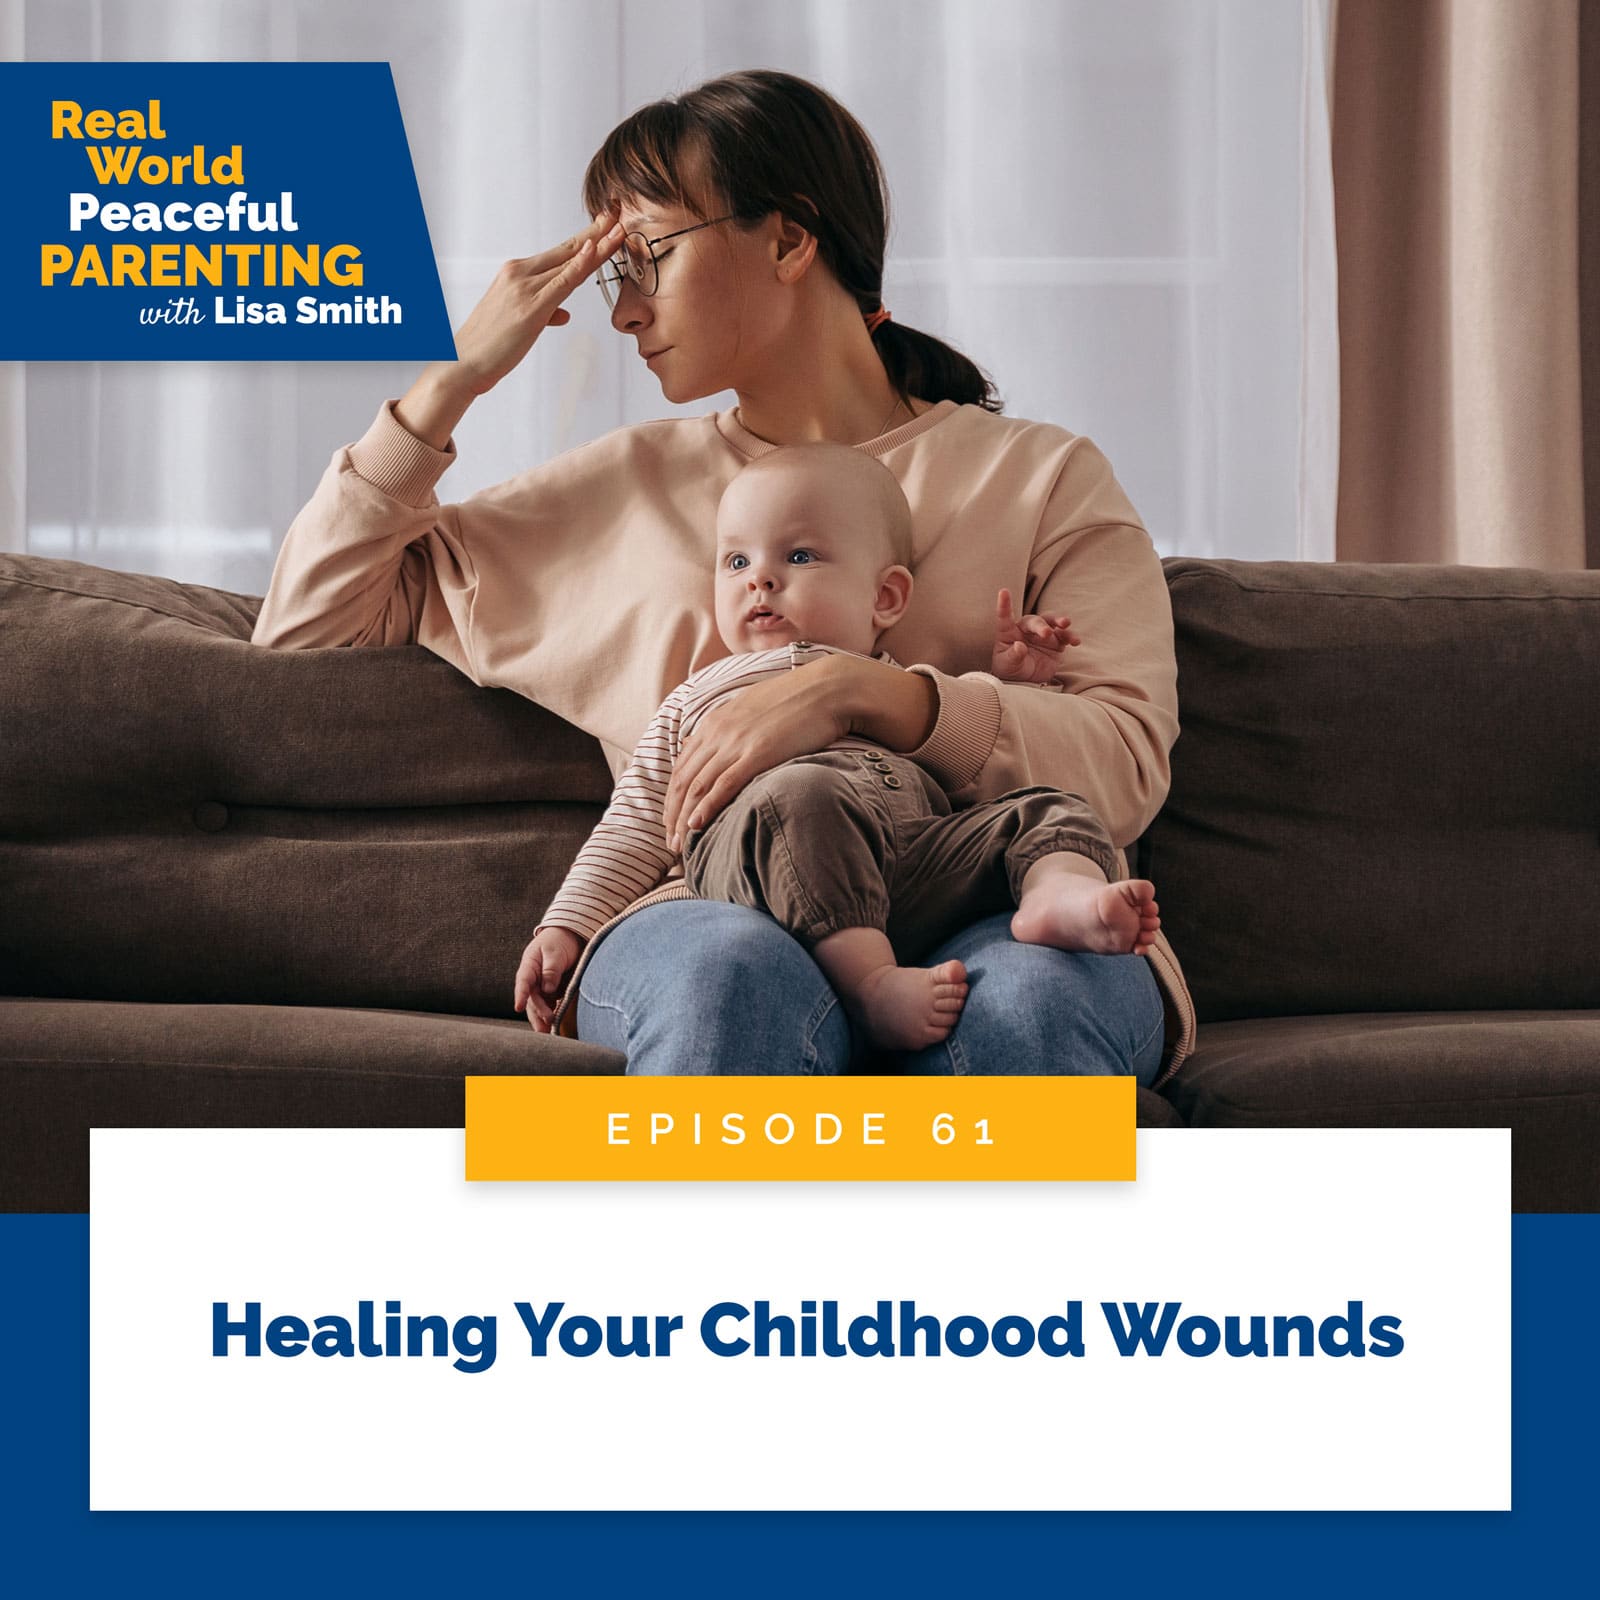 Real World Peaceful Parenting with Lisa Smith | Healing Your Childhood Wounds